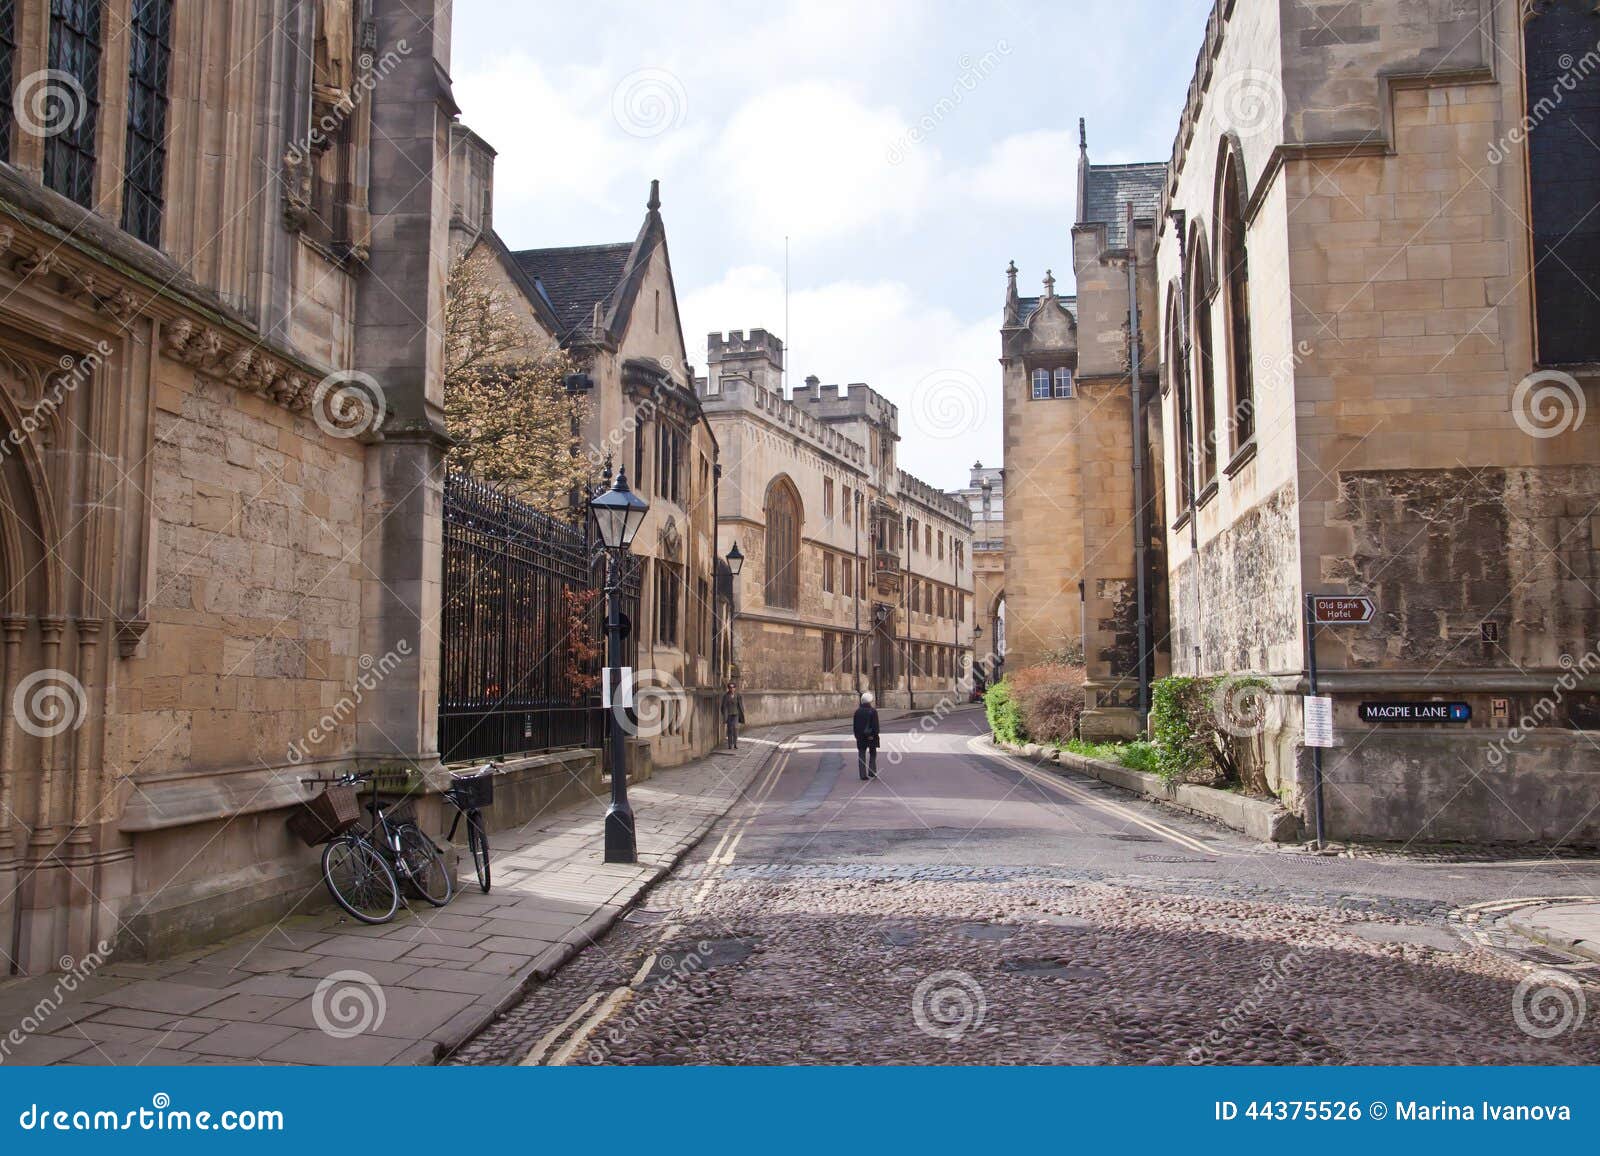 old street in oxford, england, uk